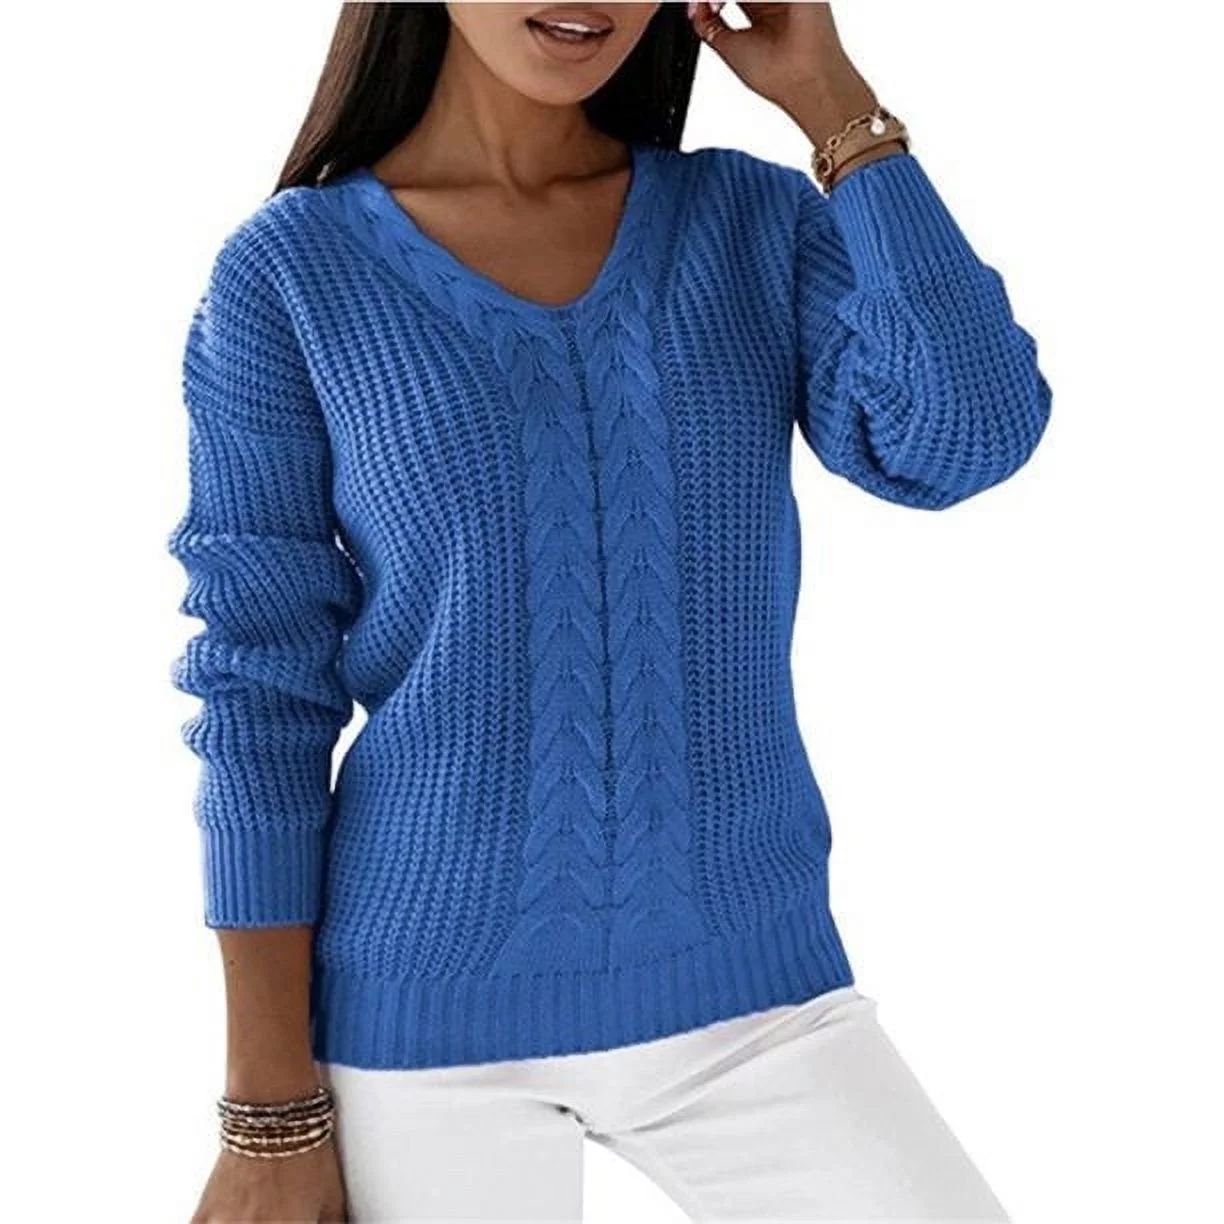 Capreze Winter Warm Sweater Jumper for Women Cable Knitted Tops Casual Long Sleeve V Neck Pullove... | Walmart (US)